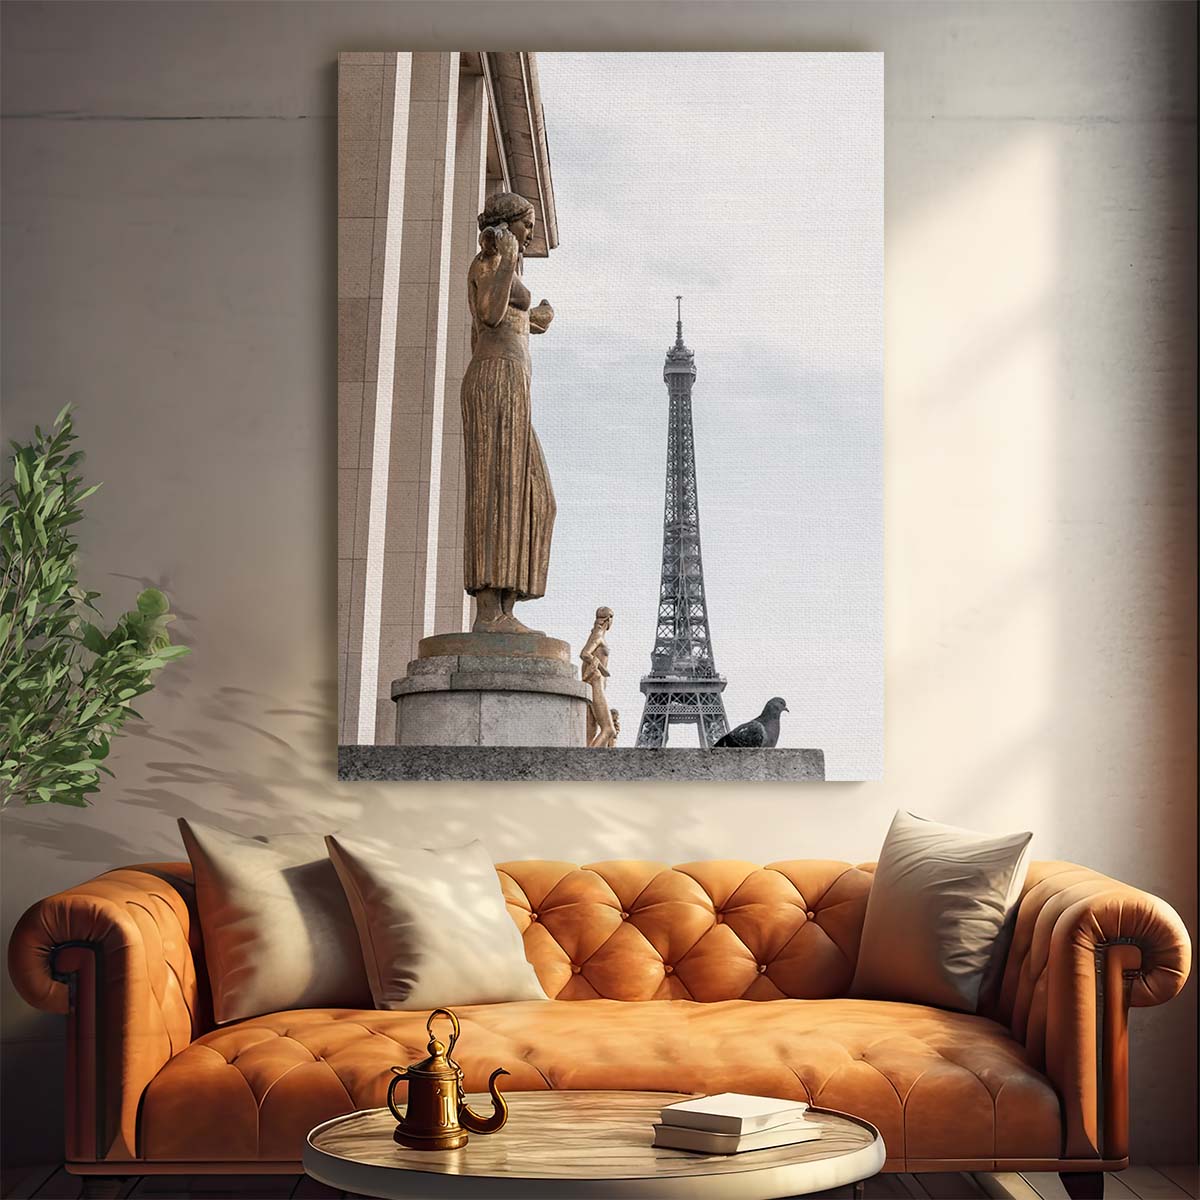 Iconic Eiffel Tower Paris Photography Dove at Trocadero, Urban Cityscape by Luxuriance Designs, made in USA